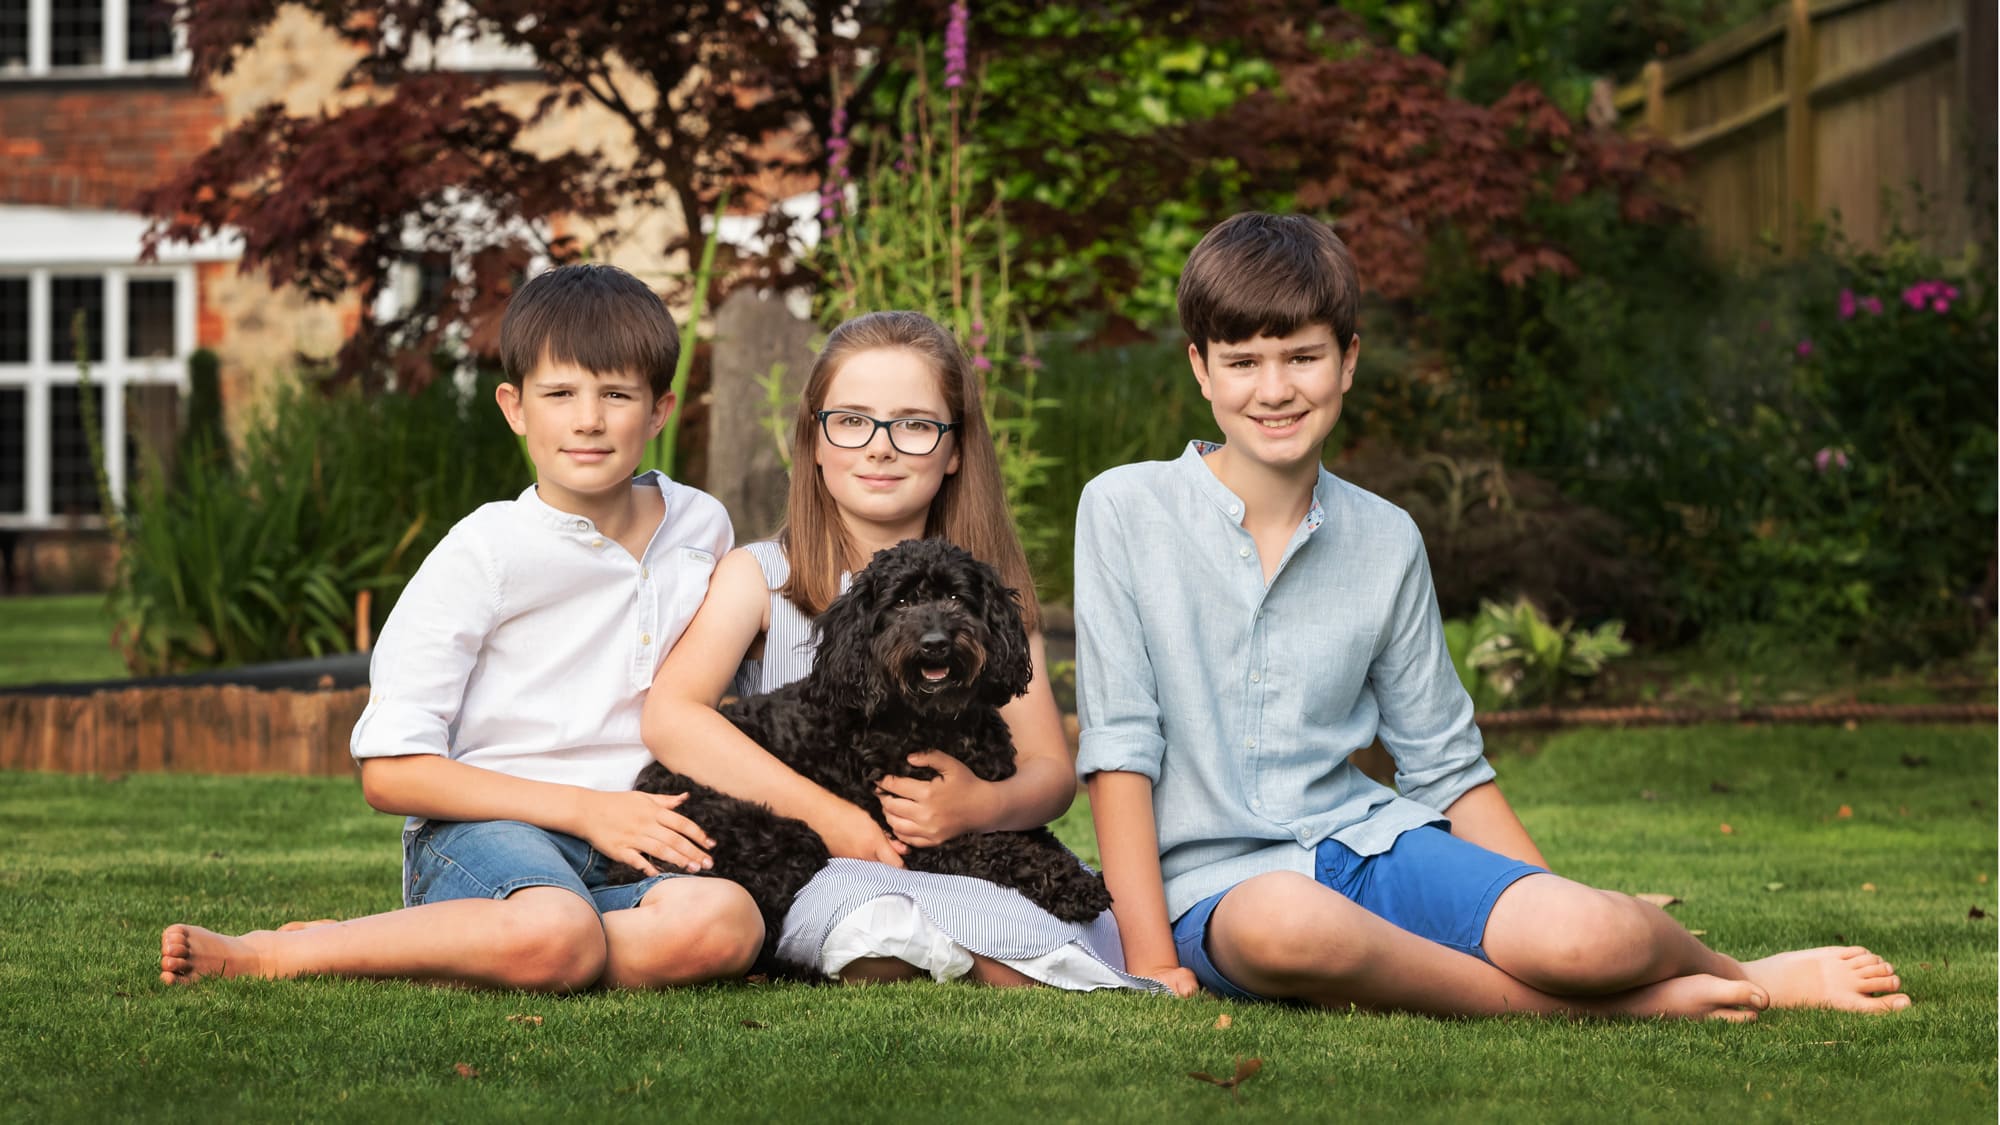 Nic Bisseker Photographer Family Photographer westsussex